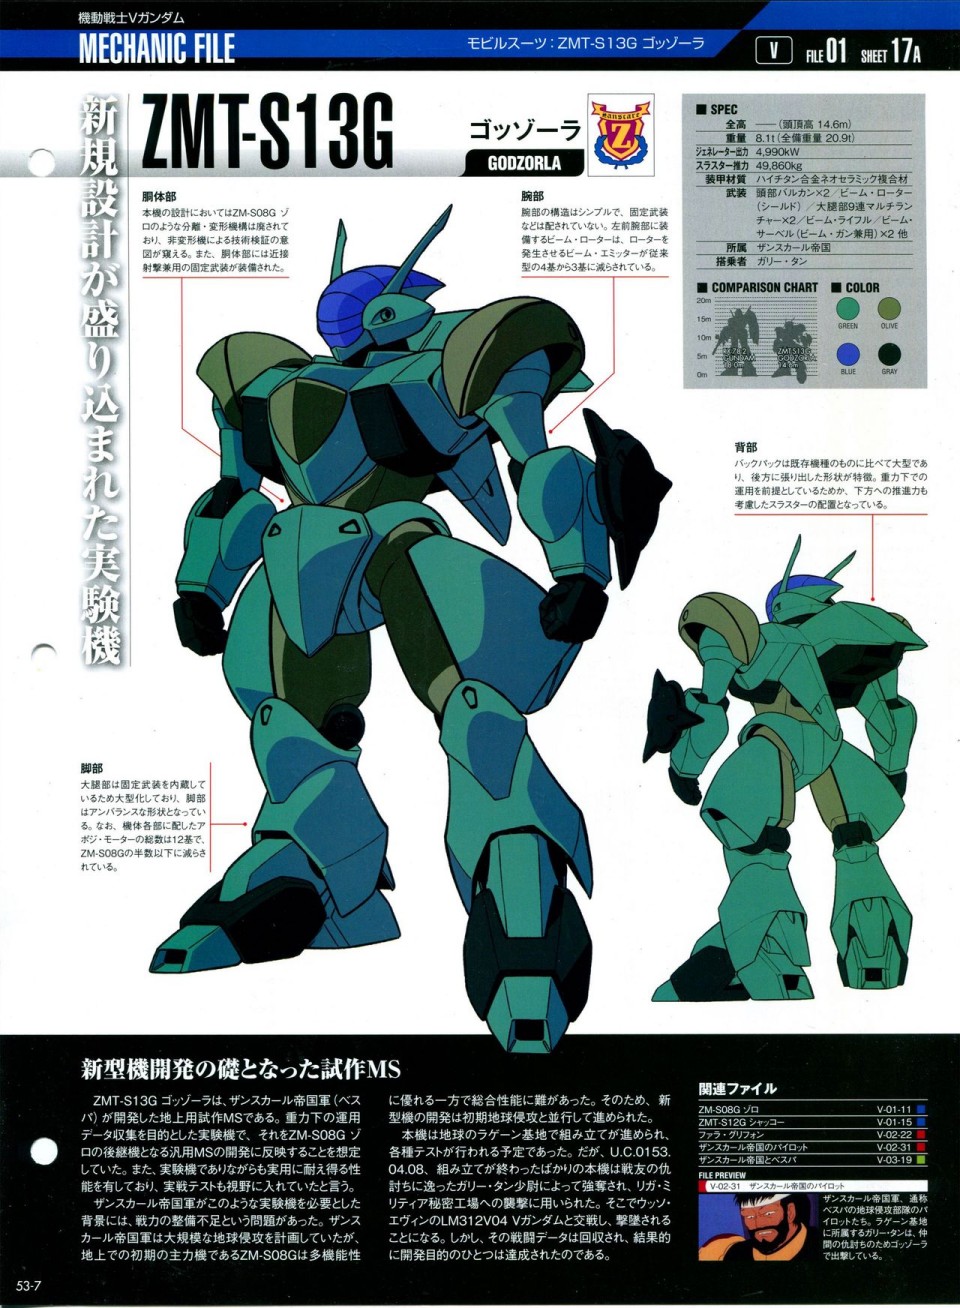 The Official Gundam Perfect File  - 第52-55話(1/3) - 3